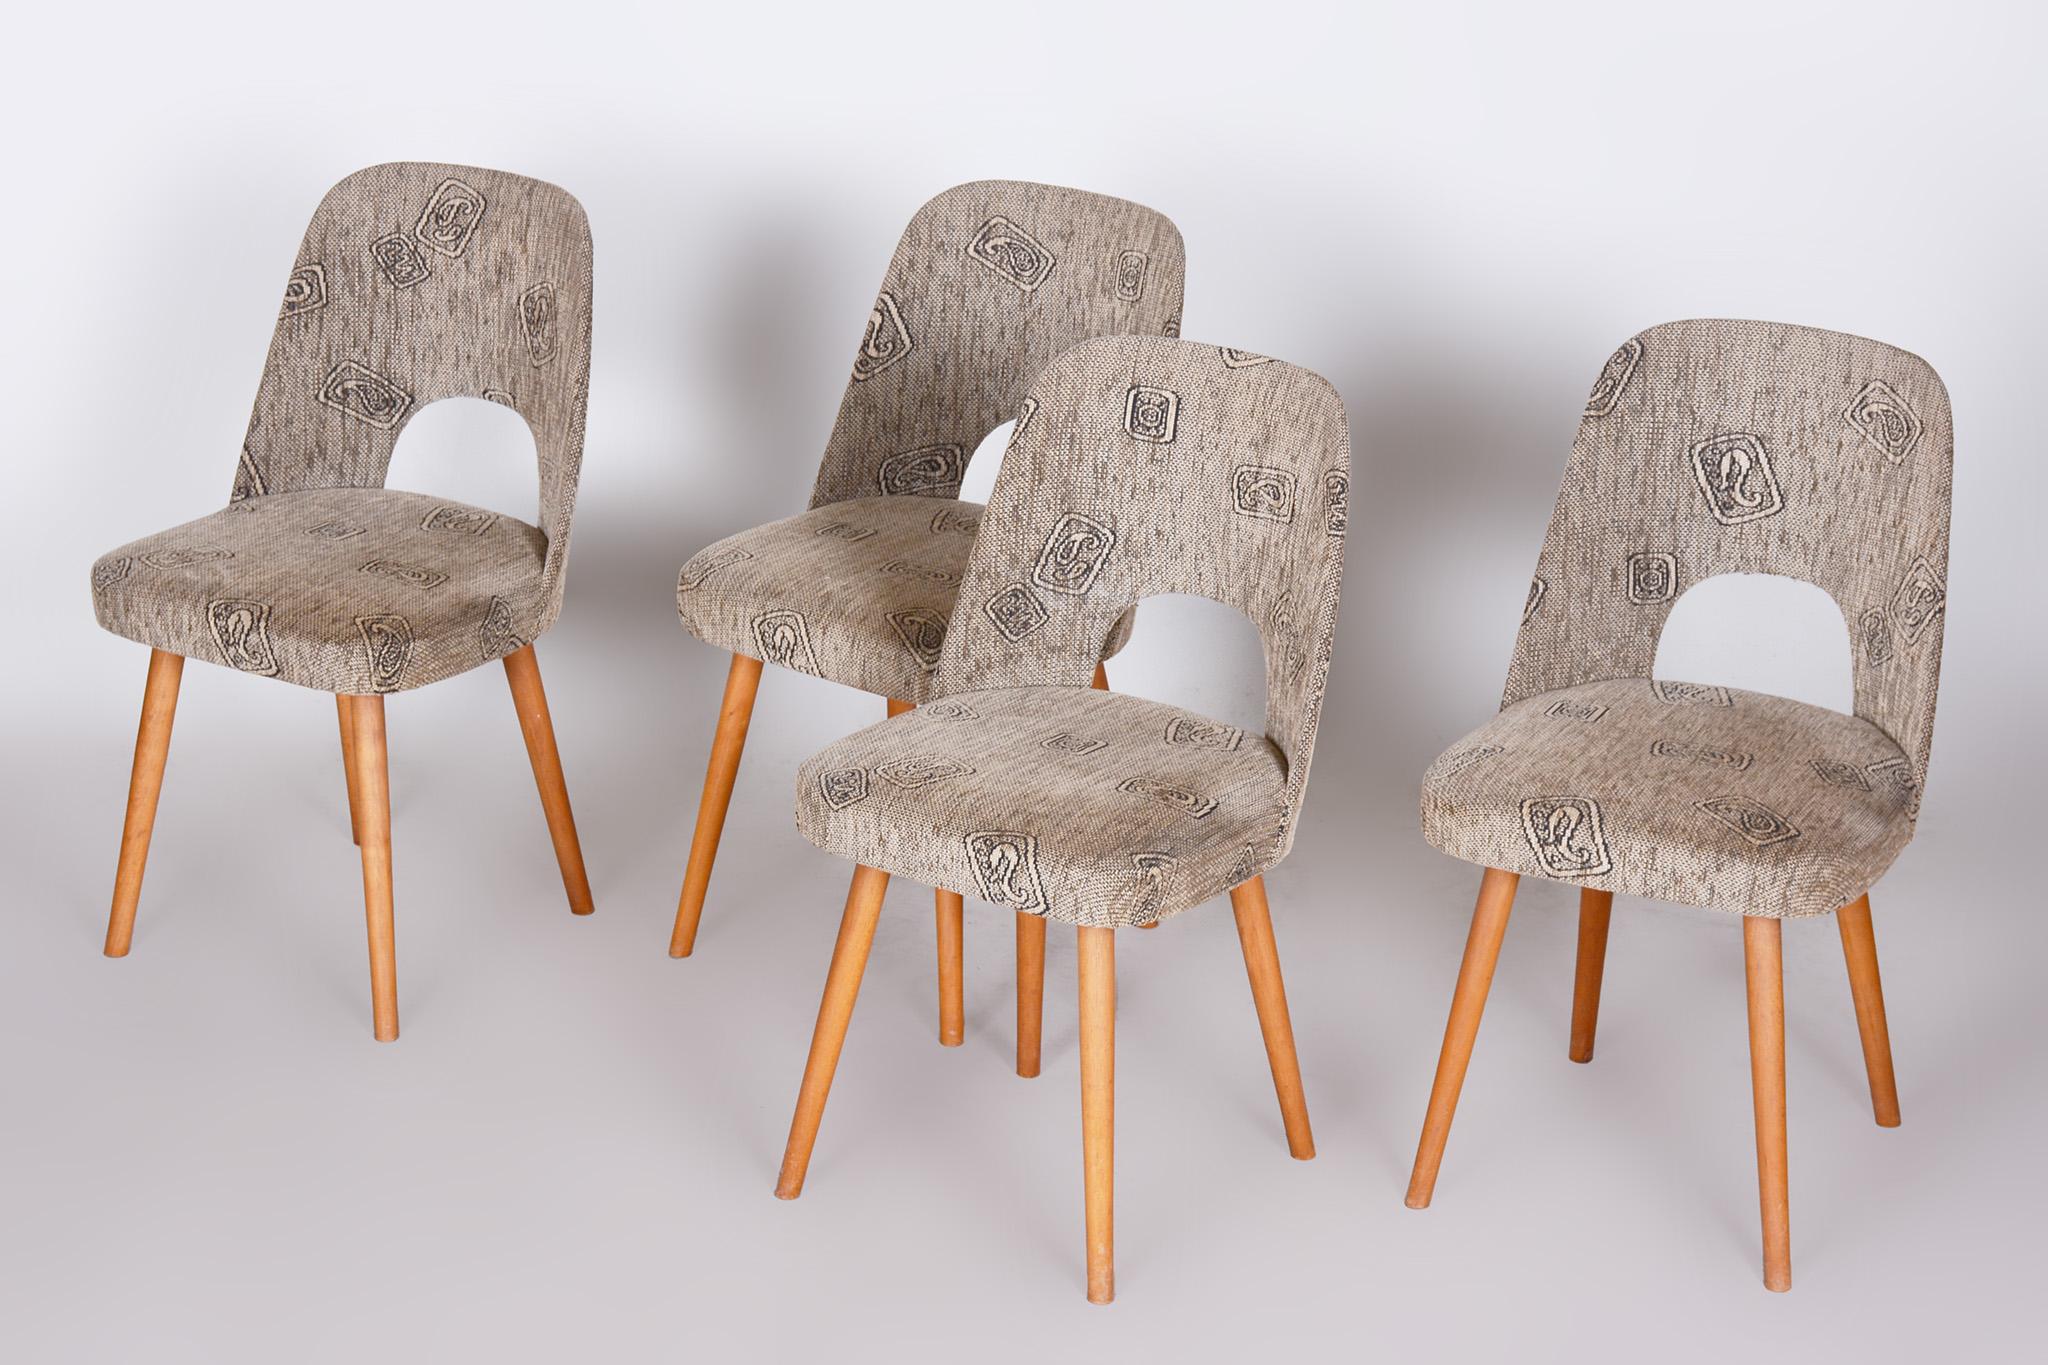 20th Century Czech Grey and Brown Ash Chairs by Oswald Haerdtl, 4 Pcs, New Upholstery, 1950s For Sale